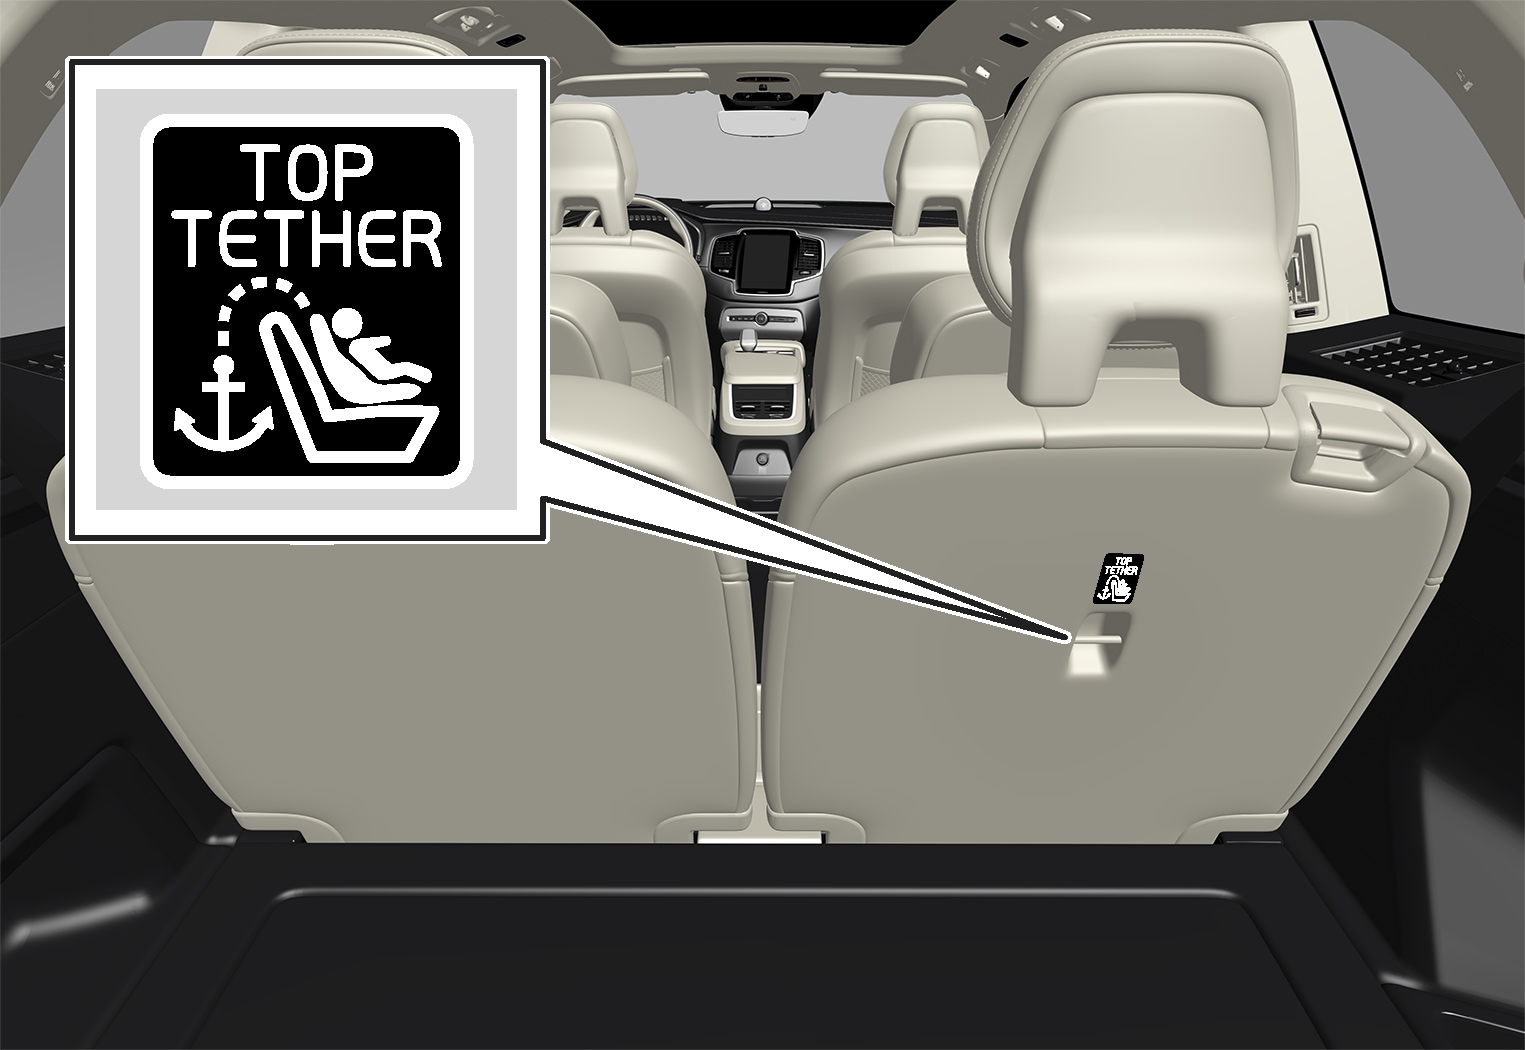 P5-1917-XC90 6-seat–Safety–Top tether anchors 3rd row